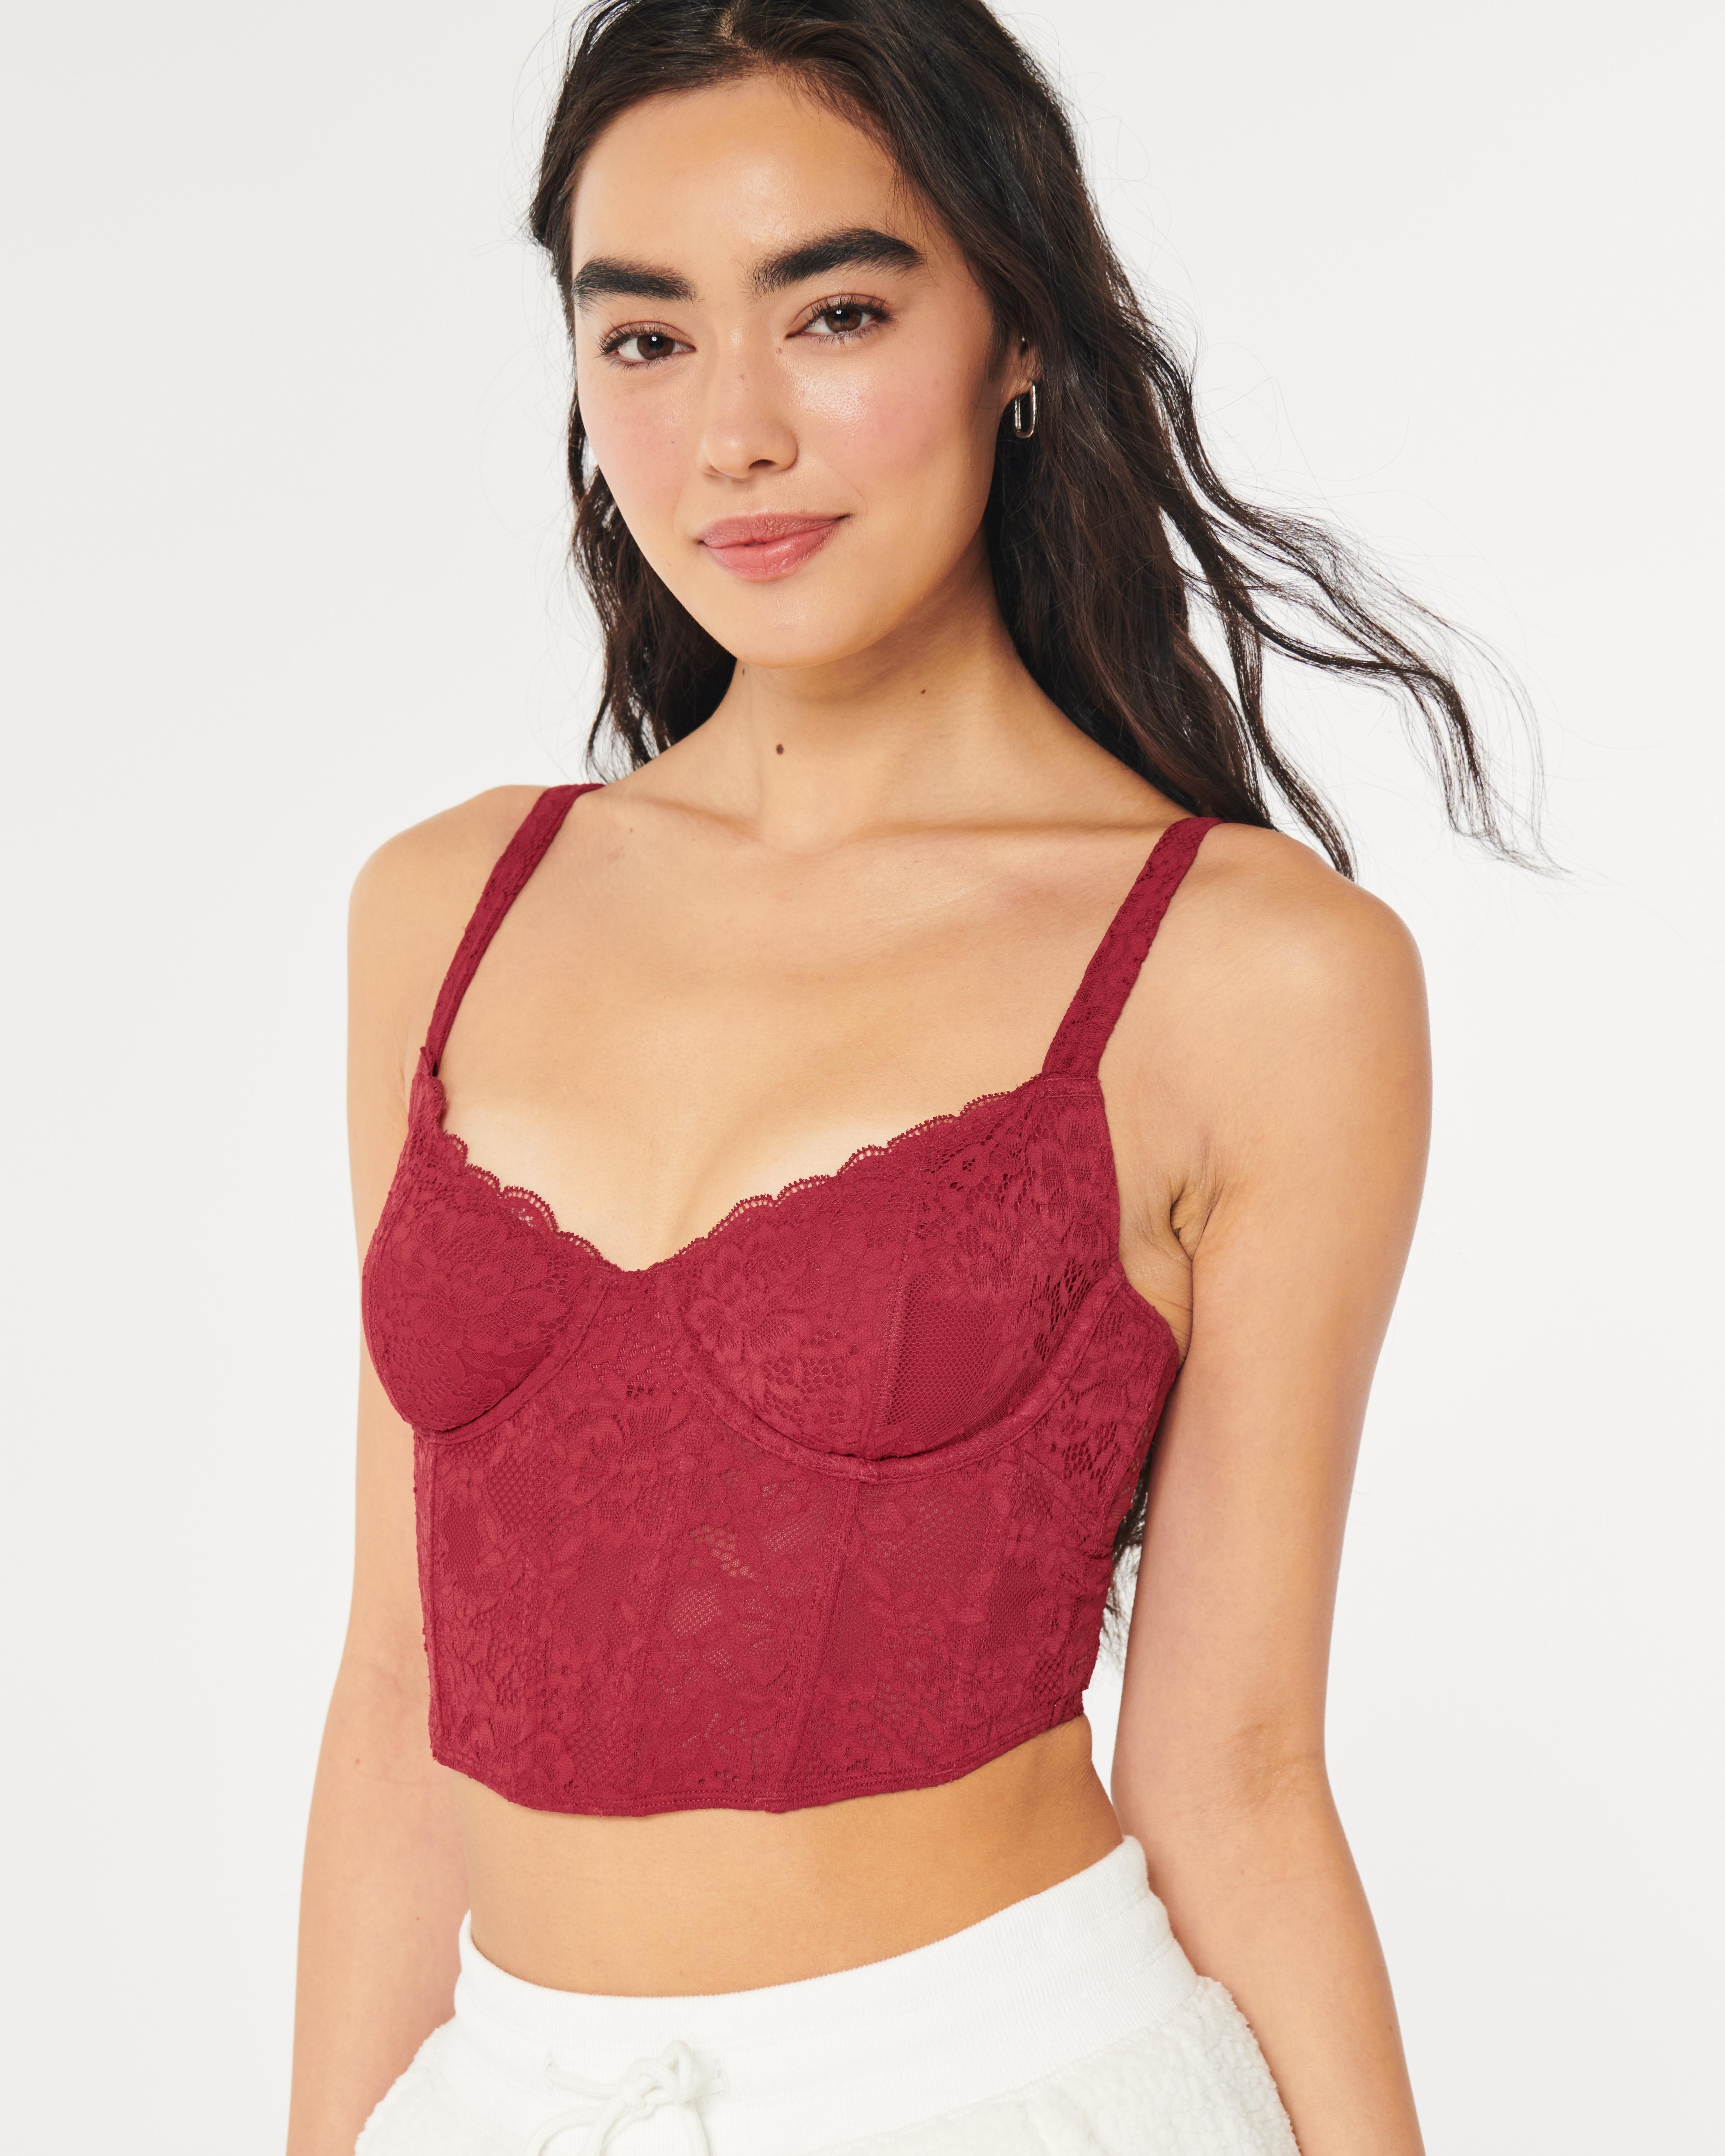 Hollister Gilly Hicks Lace Bustier in Red